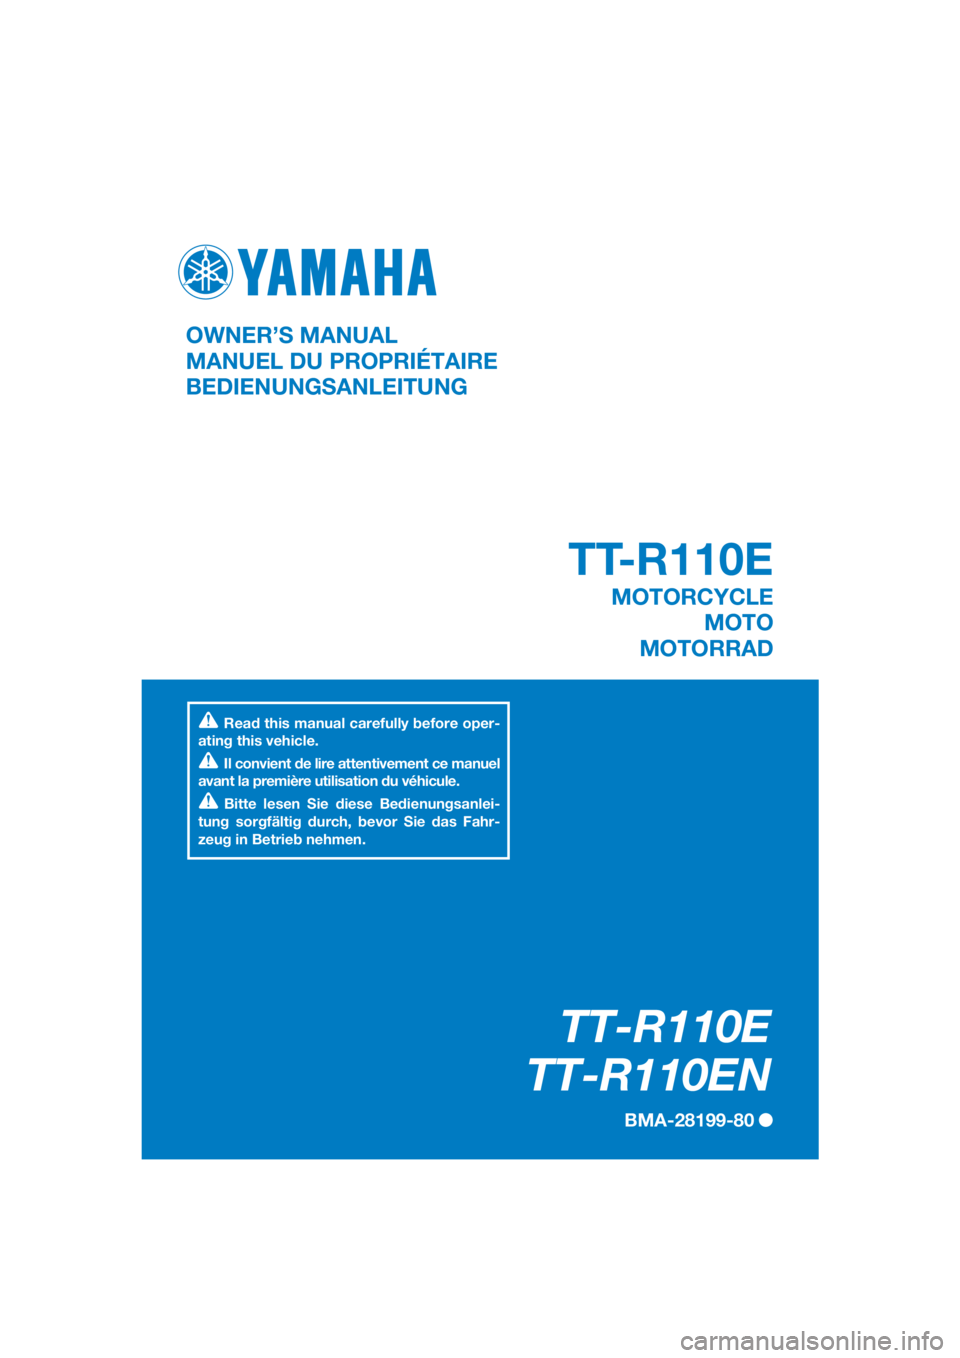 YAMAHA TT-R110E 2022  Owners Manual DIC183
TT-R110E
TT-R110EN
BMA-28199-80 
OWNER’S MANUAL
MANUEL DU PROPRIÉTAIRE
BEDIENUNGSANLEITUNG
Read this manual carefully before oper-
ating this vehicle.
Il convient de lire attentivement ce ma